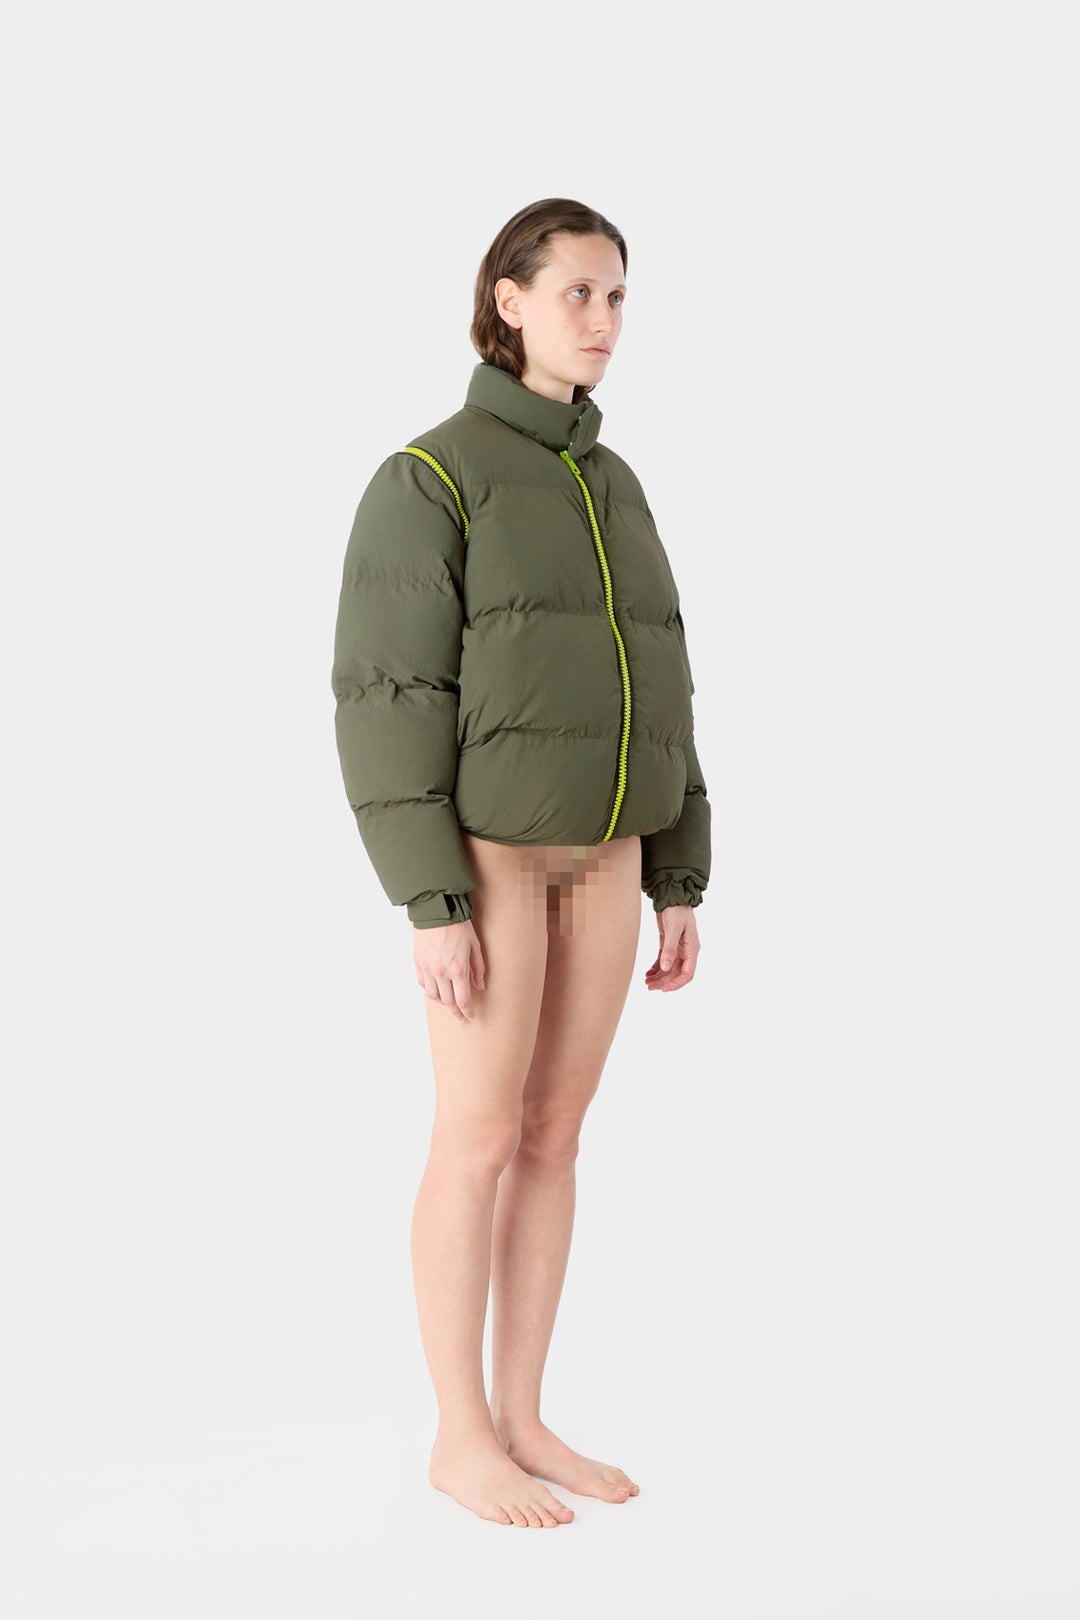 DOWN JACKET / military green - 4